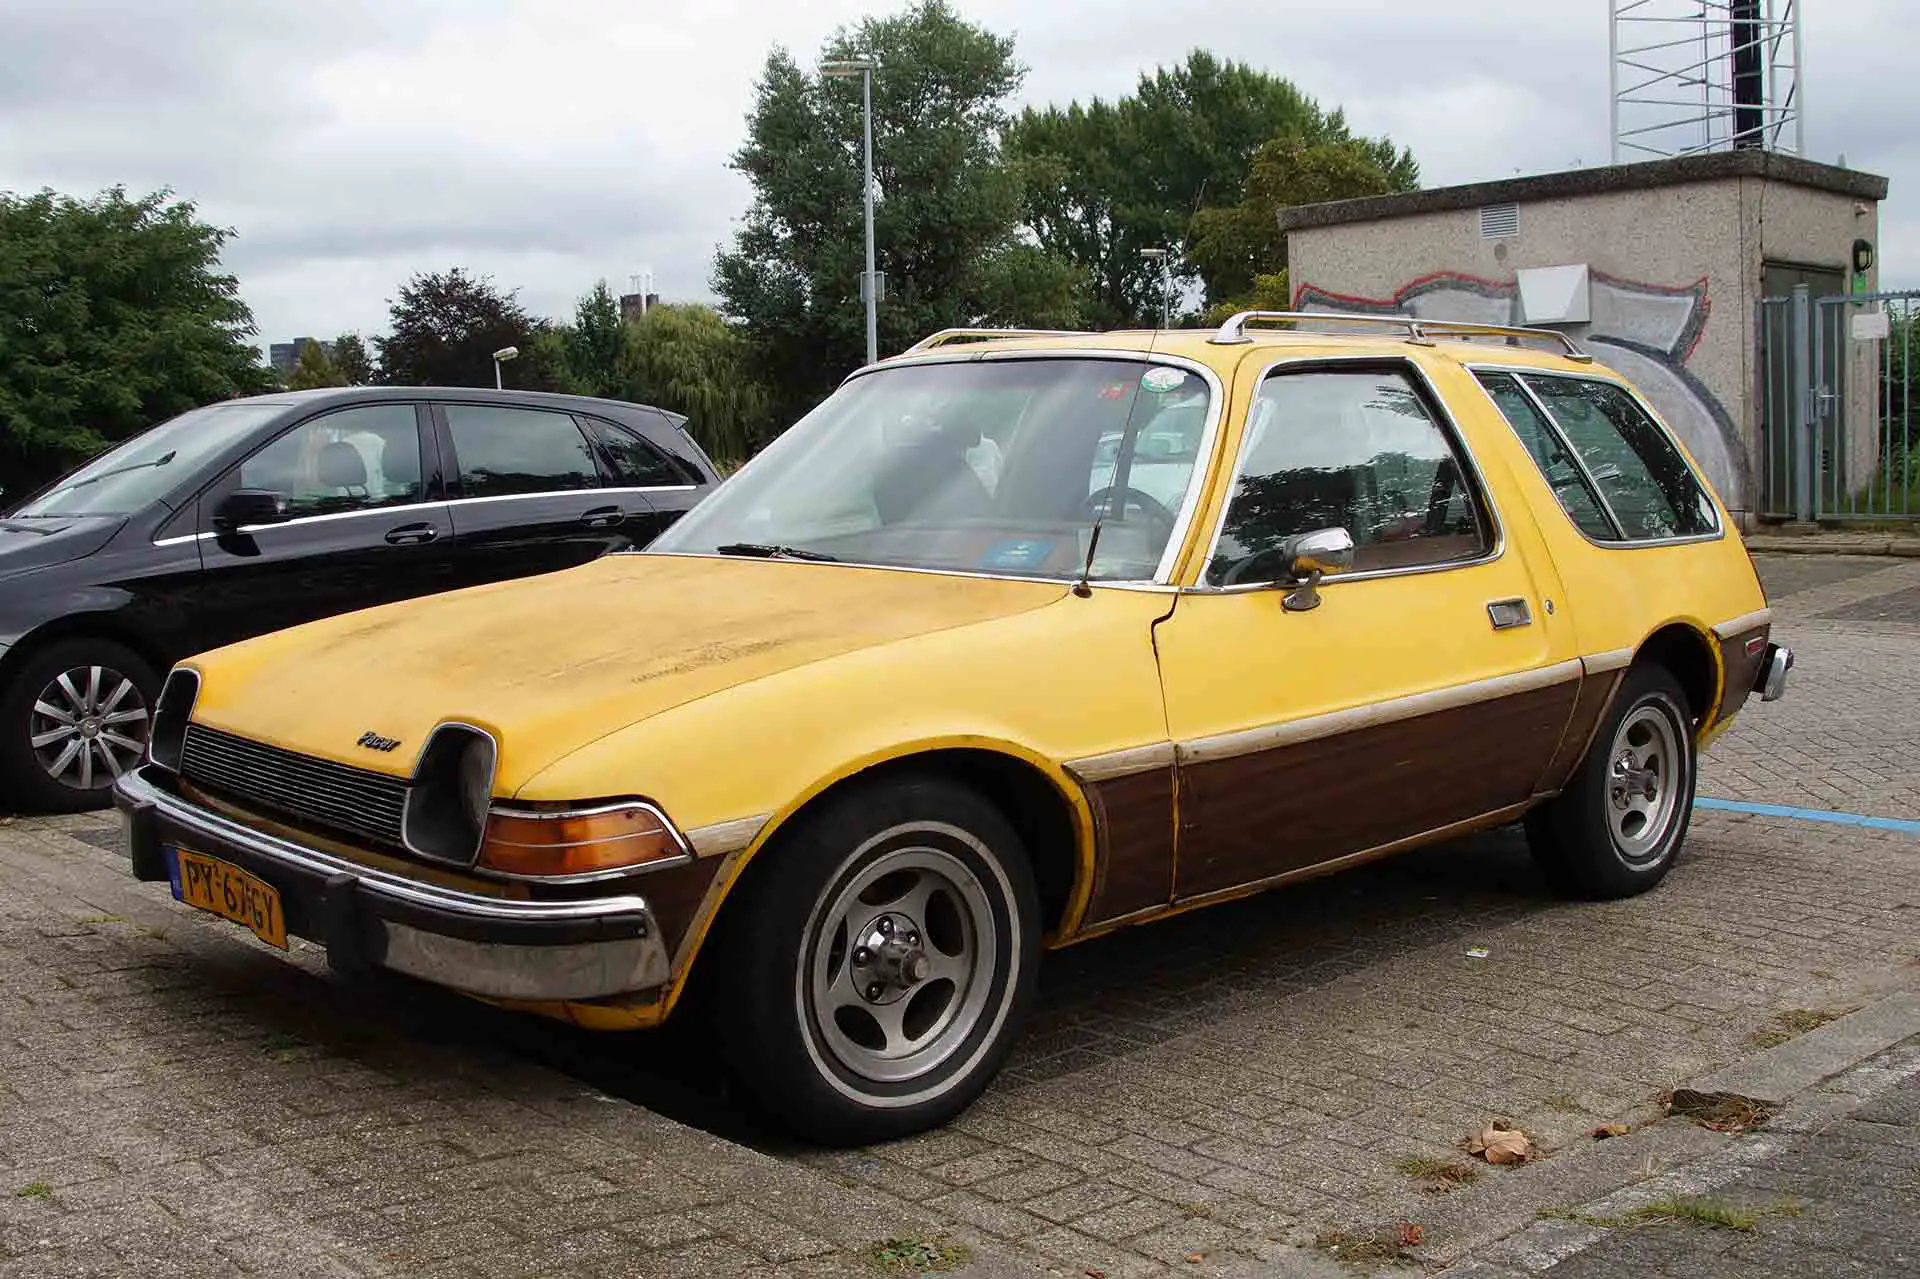 Yellow AMC Pacer parked